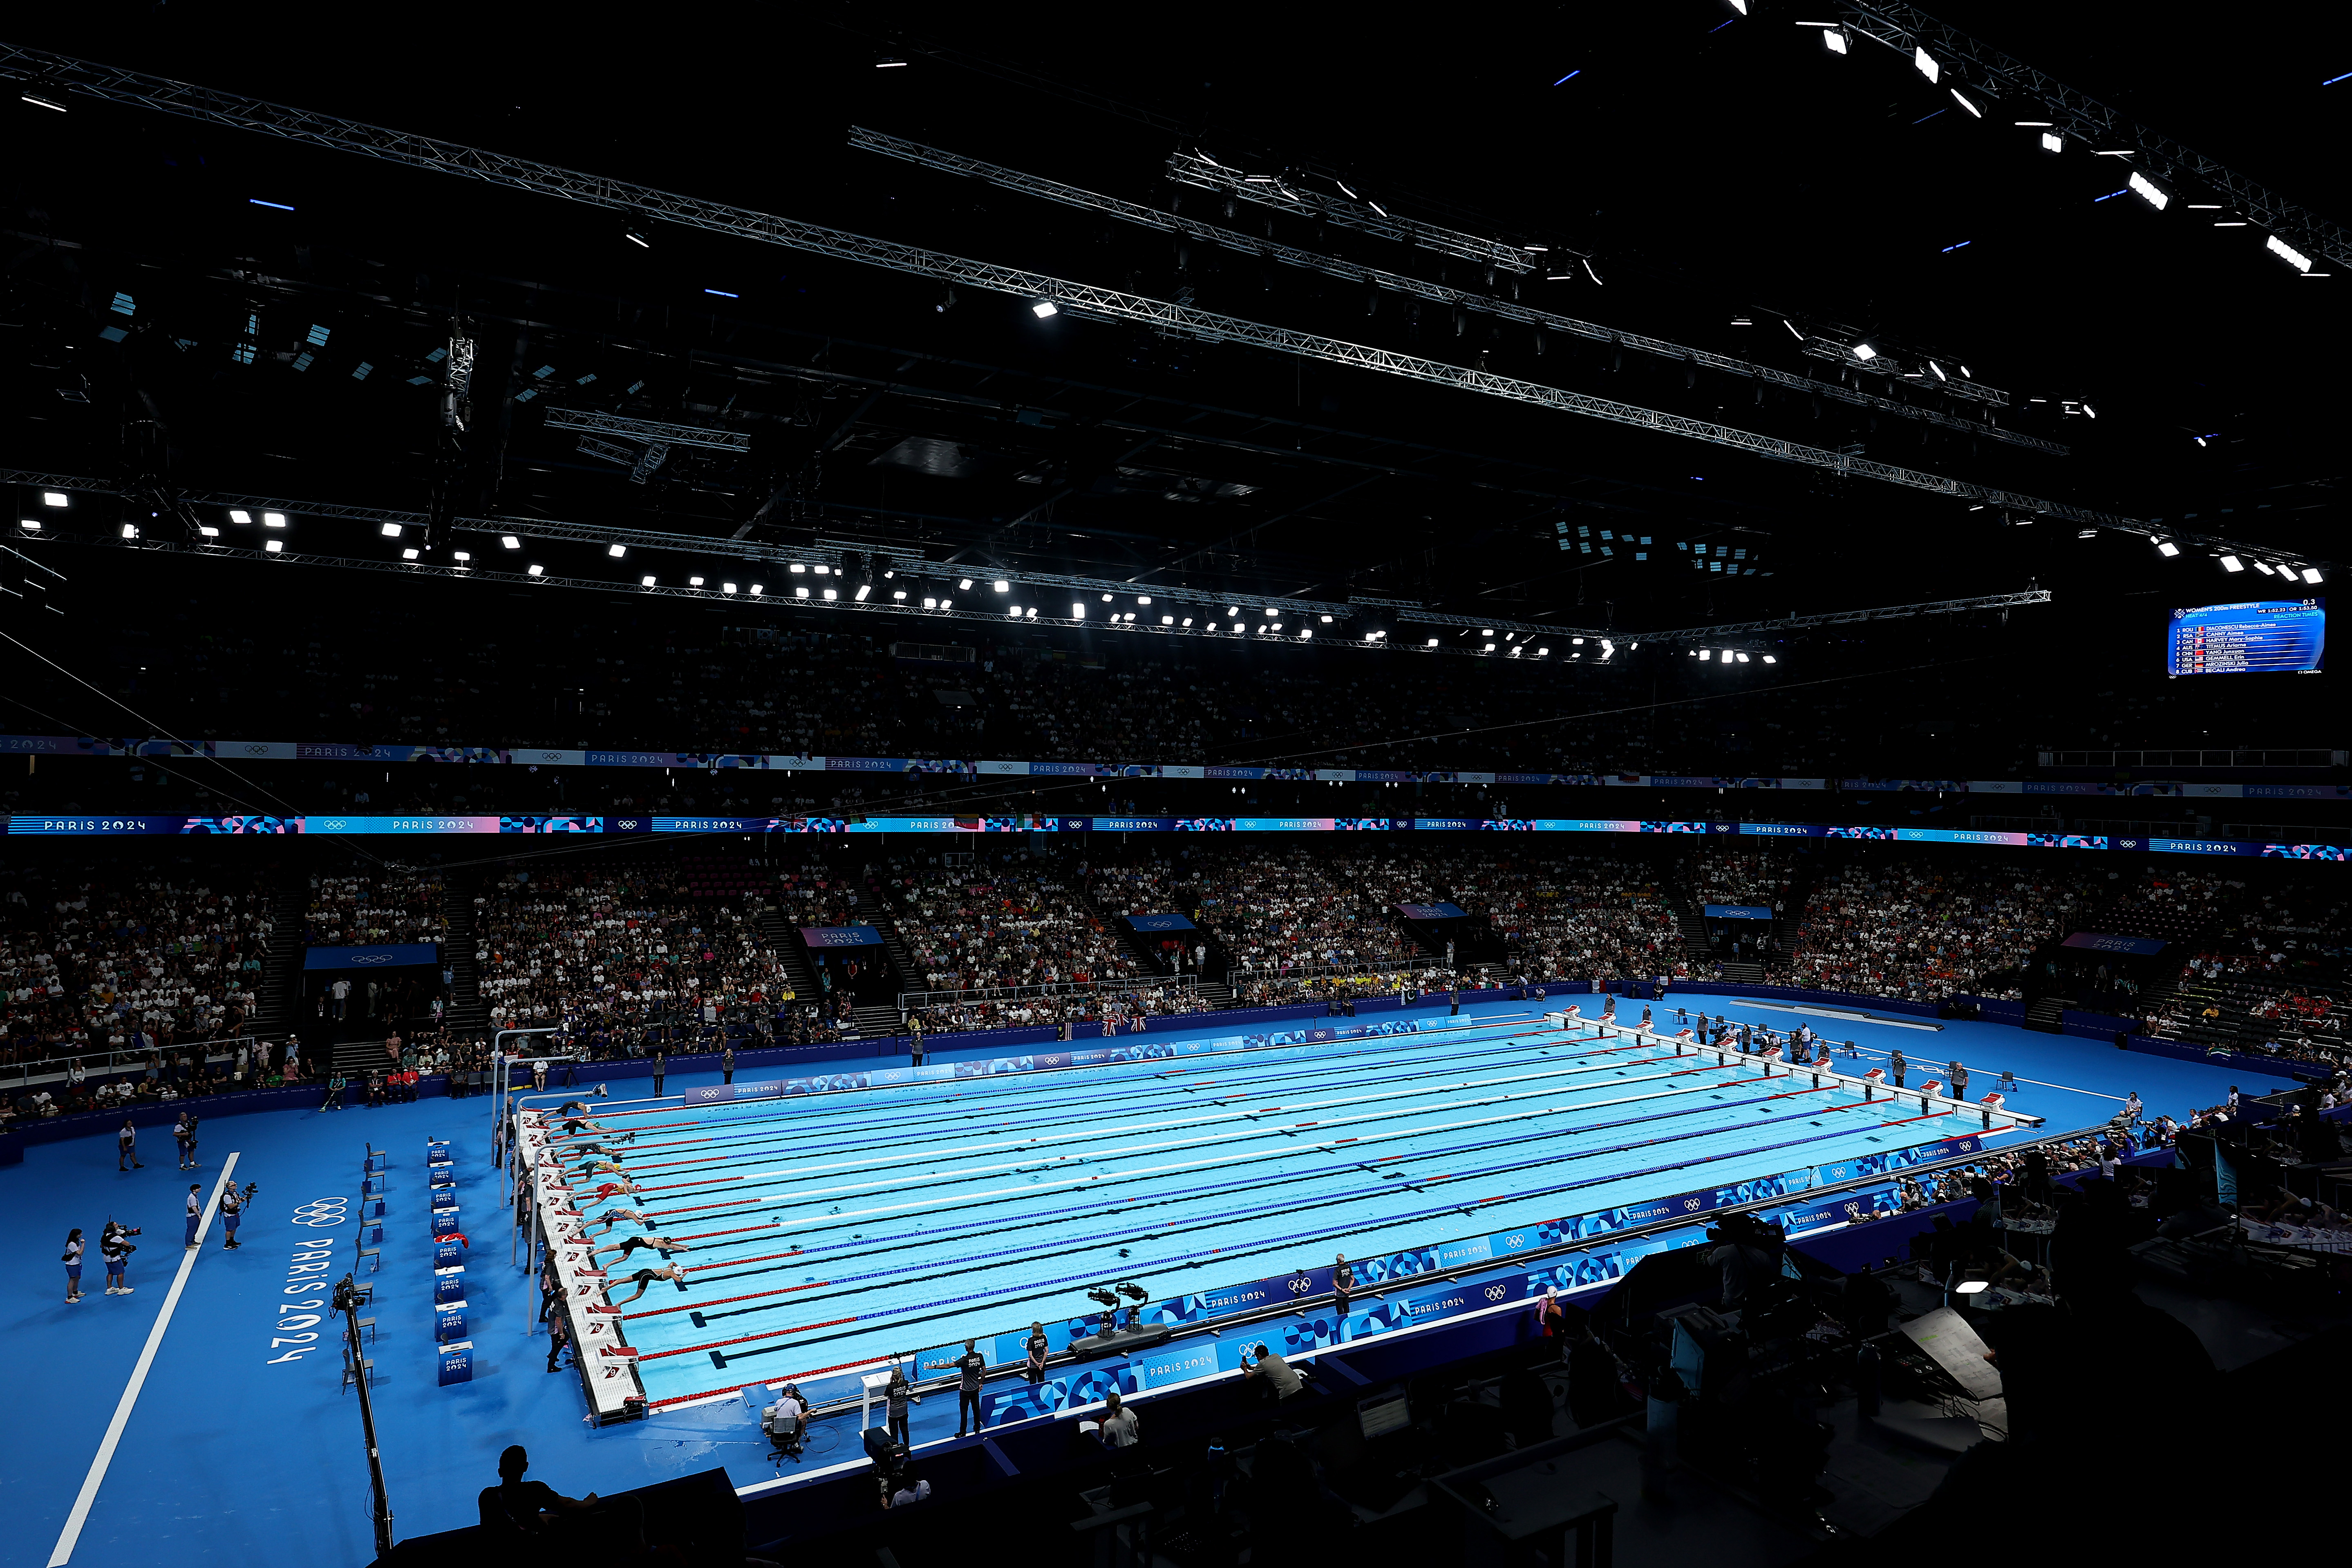 Many top swimmers are going slower than expected in the Olympic pool. Is it too shallow?